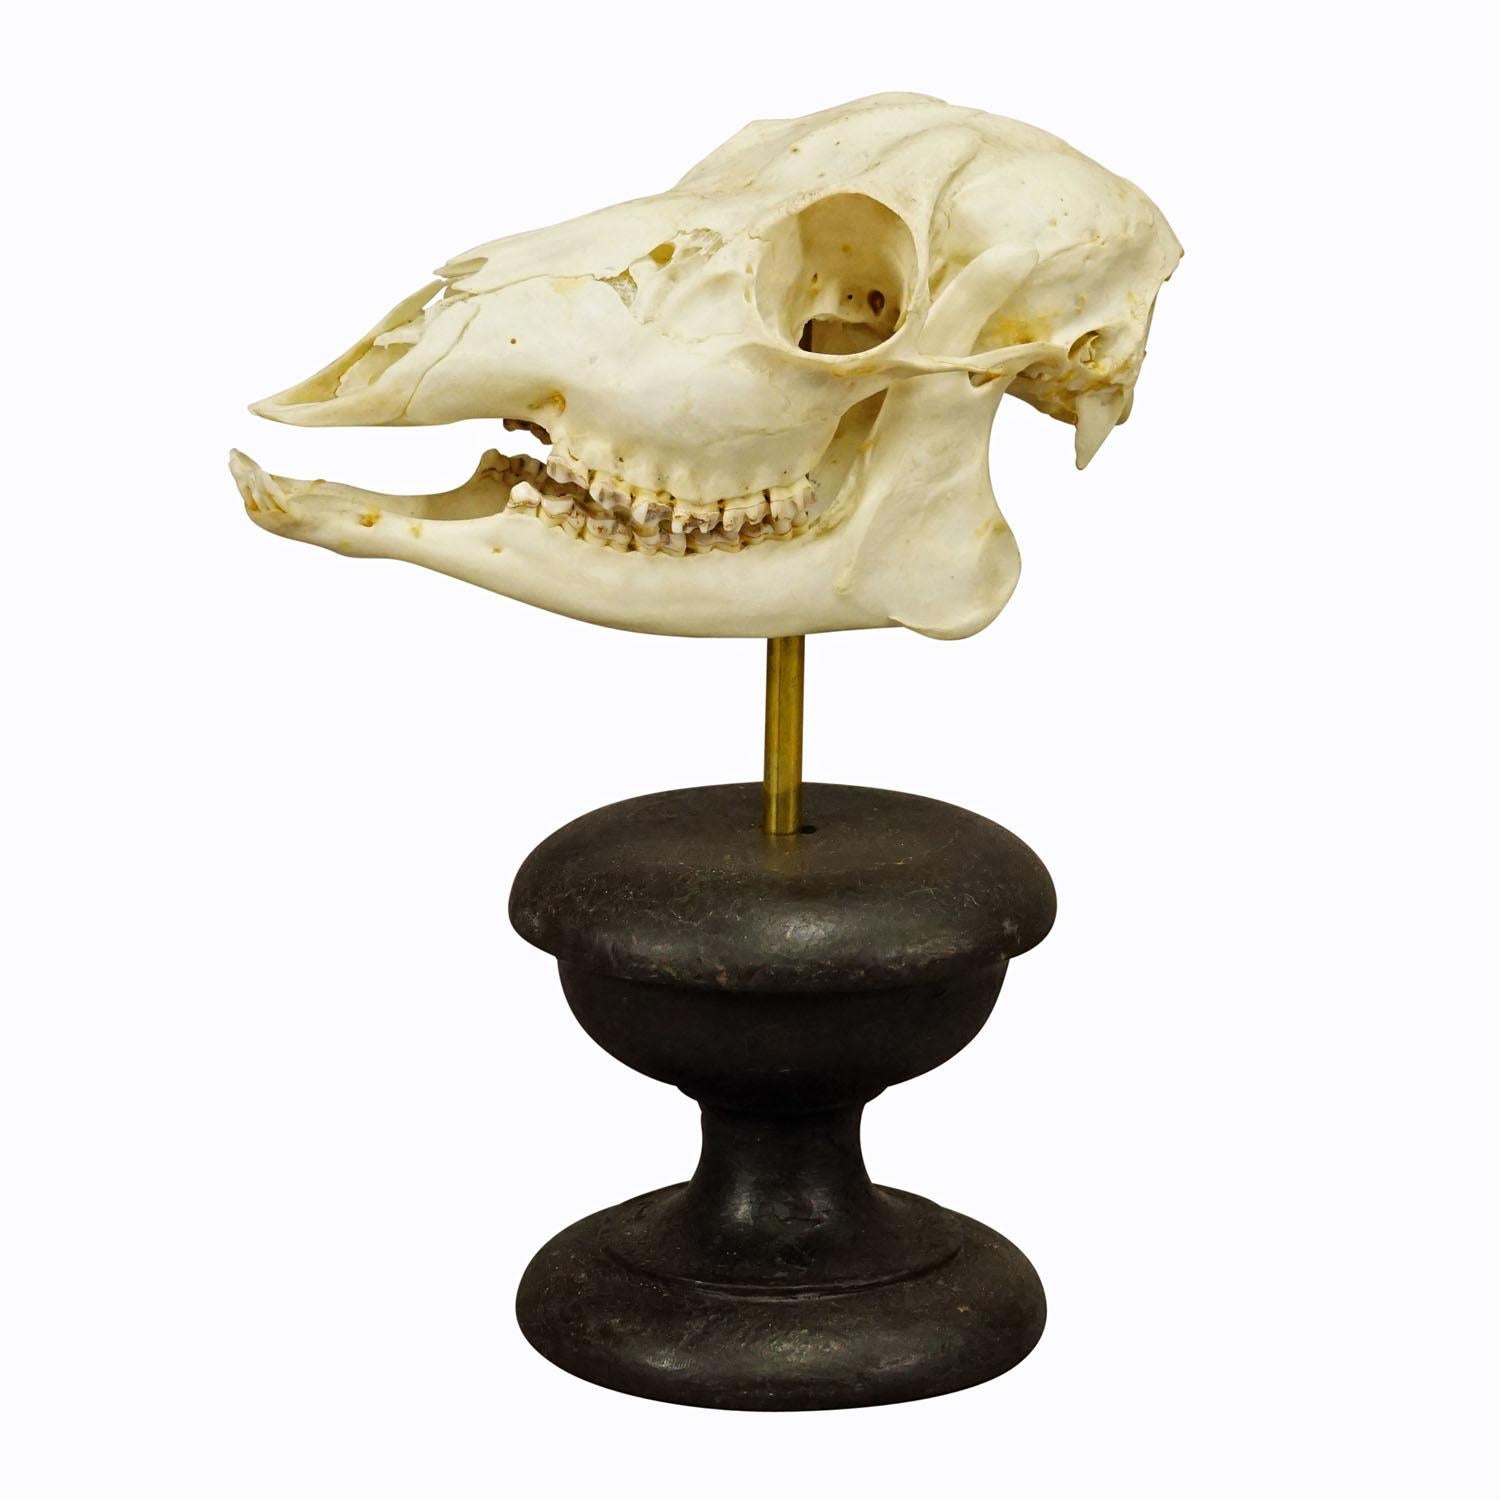 Vintage Taxidermy of a Deer Head

A taxidermied skull of the deer (Capreolus capreolus) mounted on an ebonized wooden turned base. Germany, ca. 1950s.

Trophies are mementos form the hunted game, which are kept by the huntsman as a souvenir or